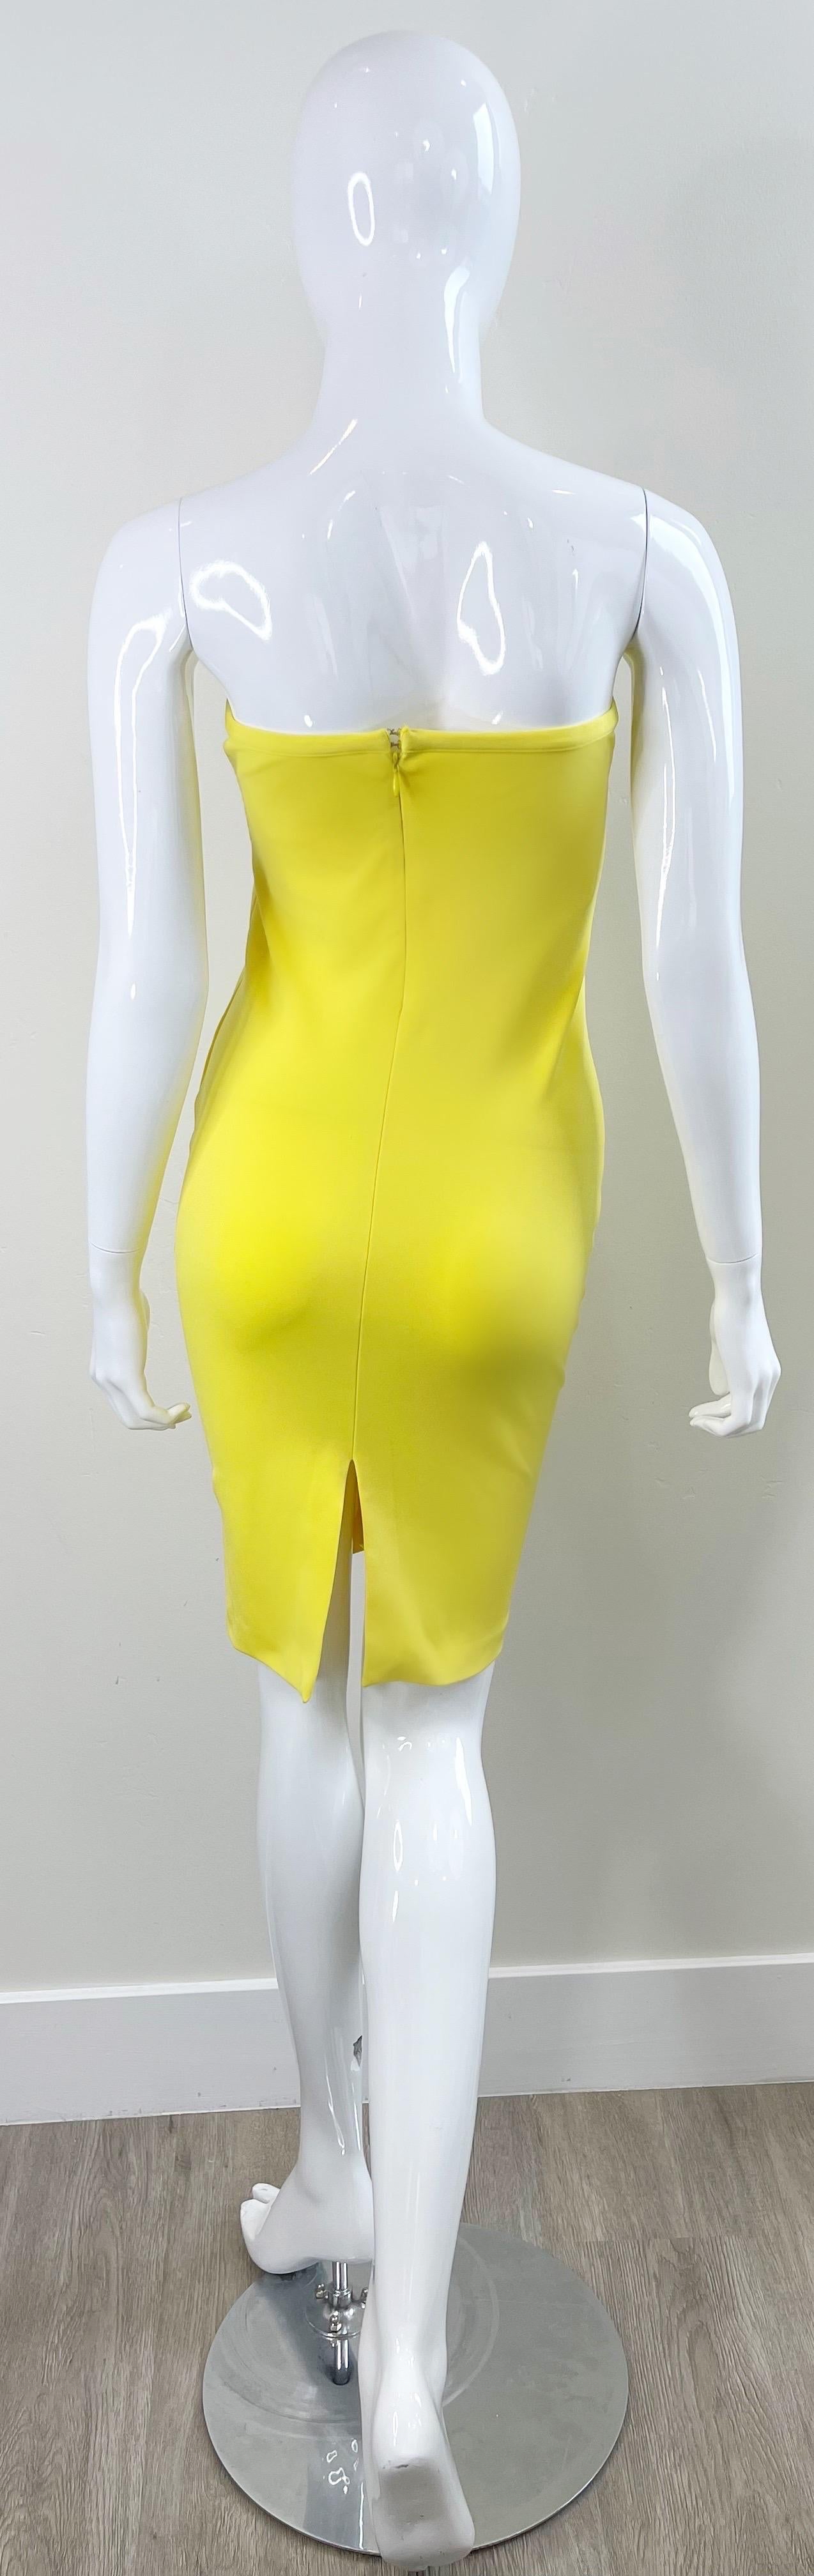 1990s Gianni Versace Versus Size 8 Canary Yellow Strapless Vintage 90s Dress For Sale 1